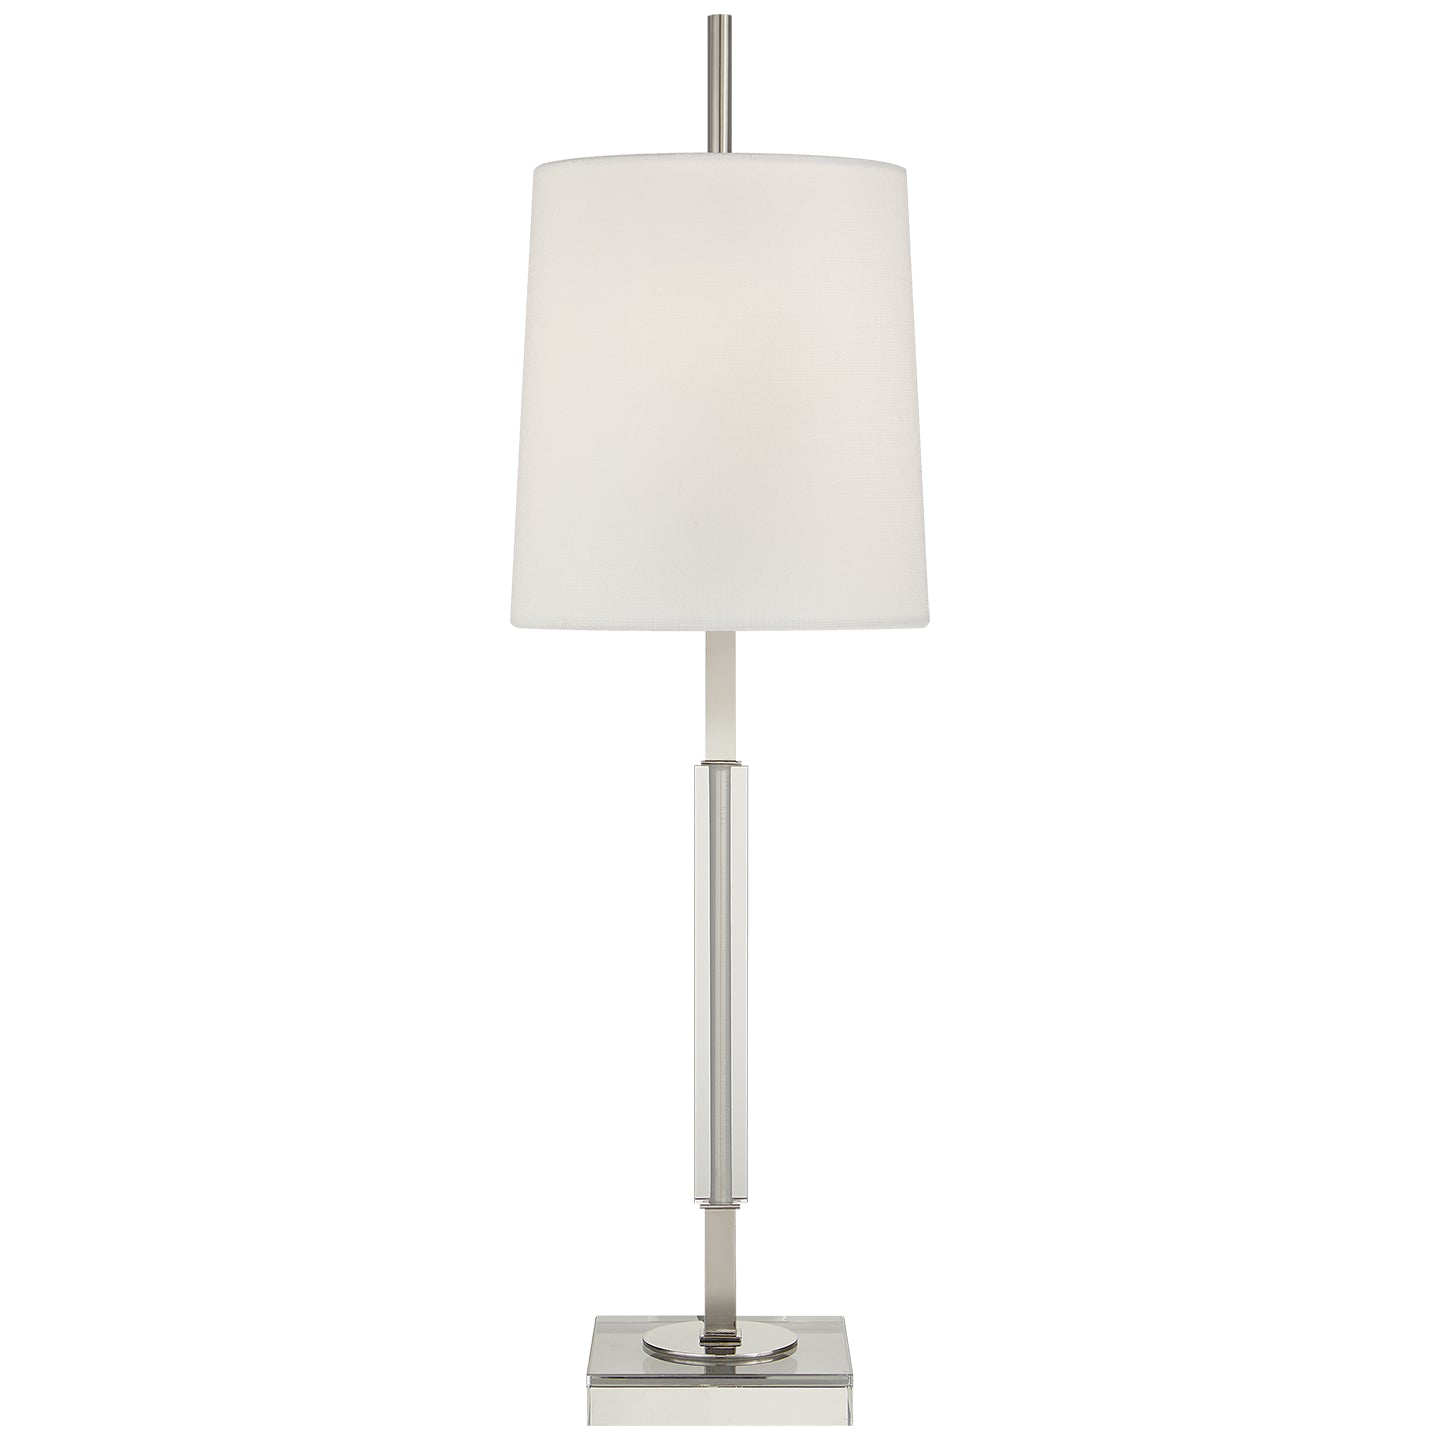 Load image into Gallery viewer, Visual Comfort Signature - TOB 3627PN/CG-L - One Light Table Lamp - Lexington - Polished Nickel with Crystal
